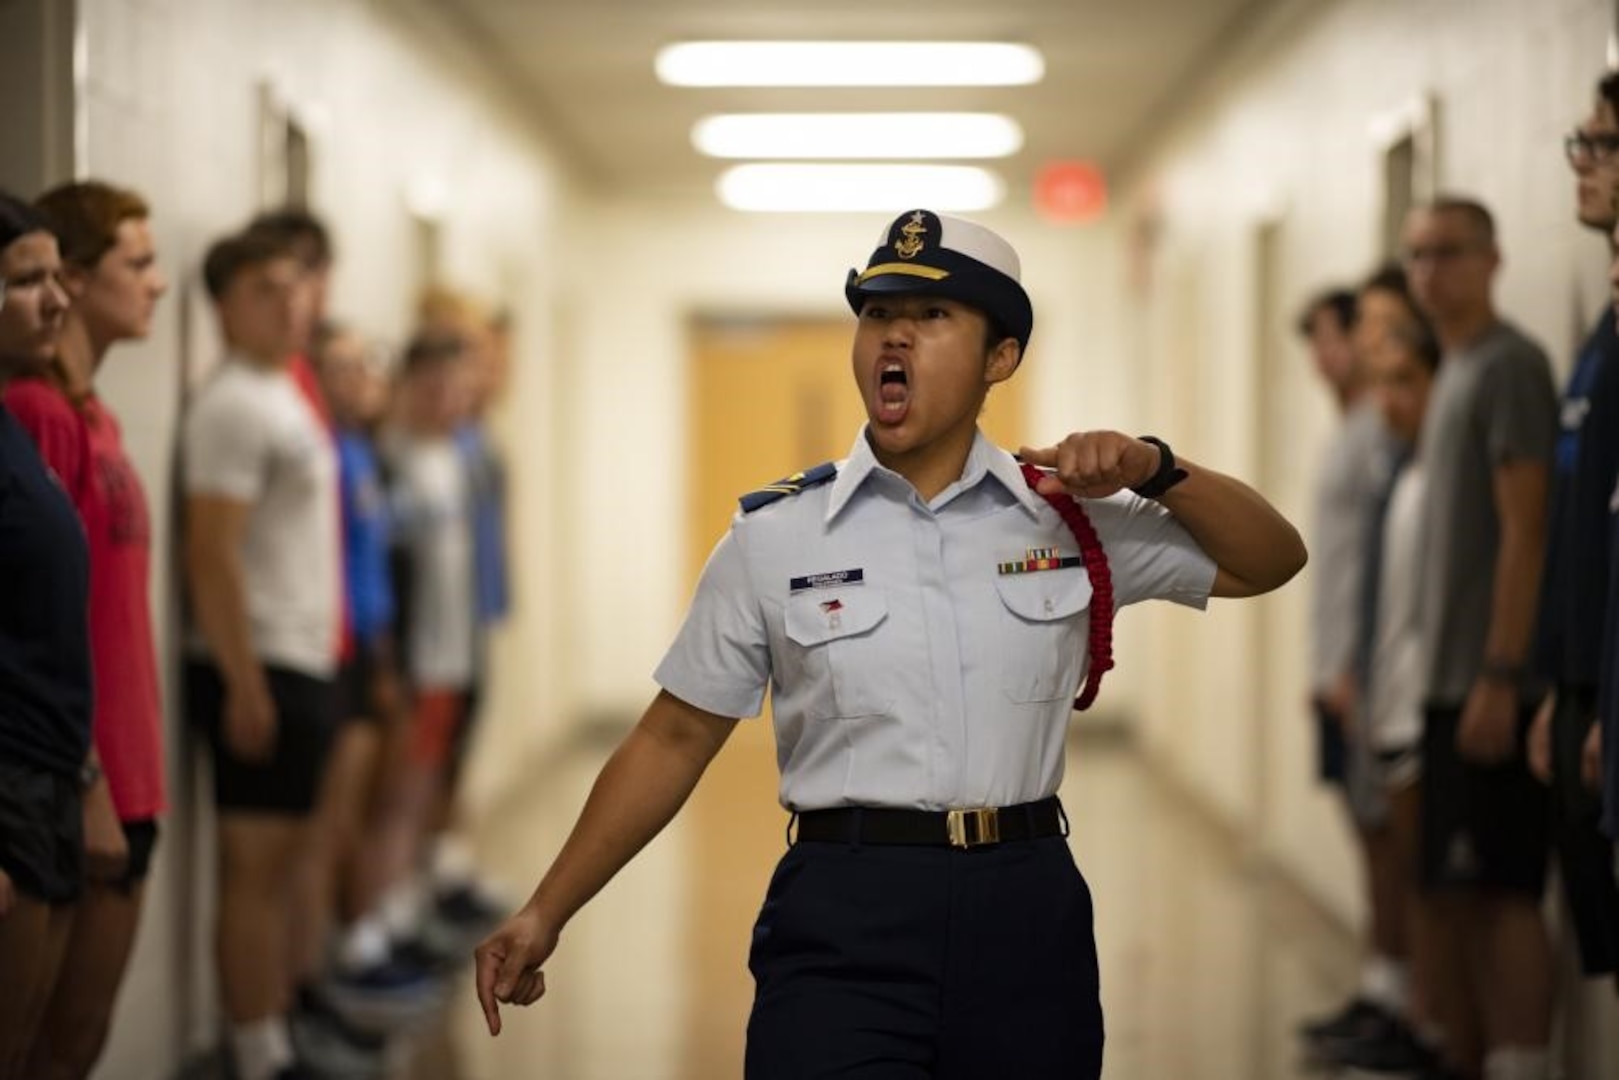 The U.S. Coast Guard Academy welcomes 302 young women and men to the Class of 2026 for Day One, June 27, 2022. Day One marks the start of Swab Summer, an intensive seven-week program that prepares students for military and Academy life. (U.S. Coast Guard photo by Petty Officer 3rd Class Matthew Abban)